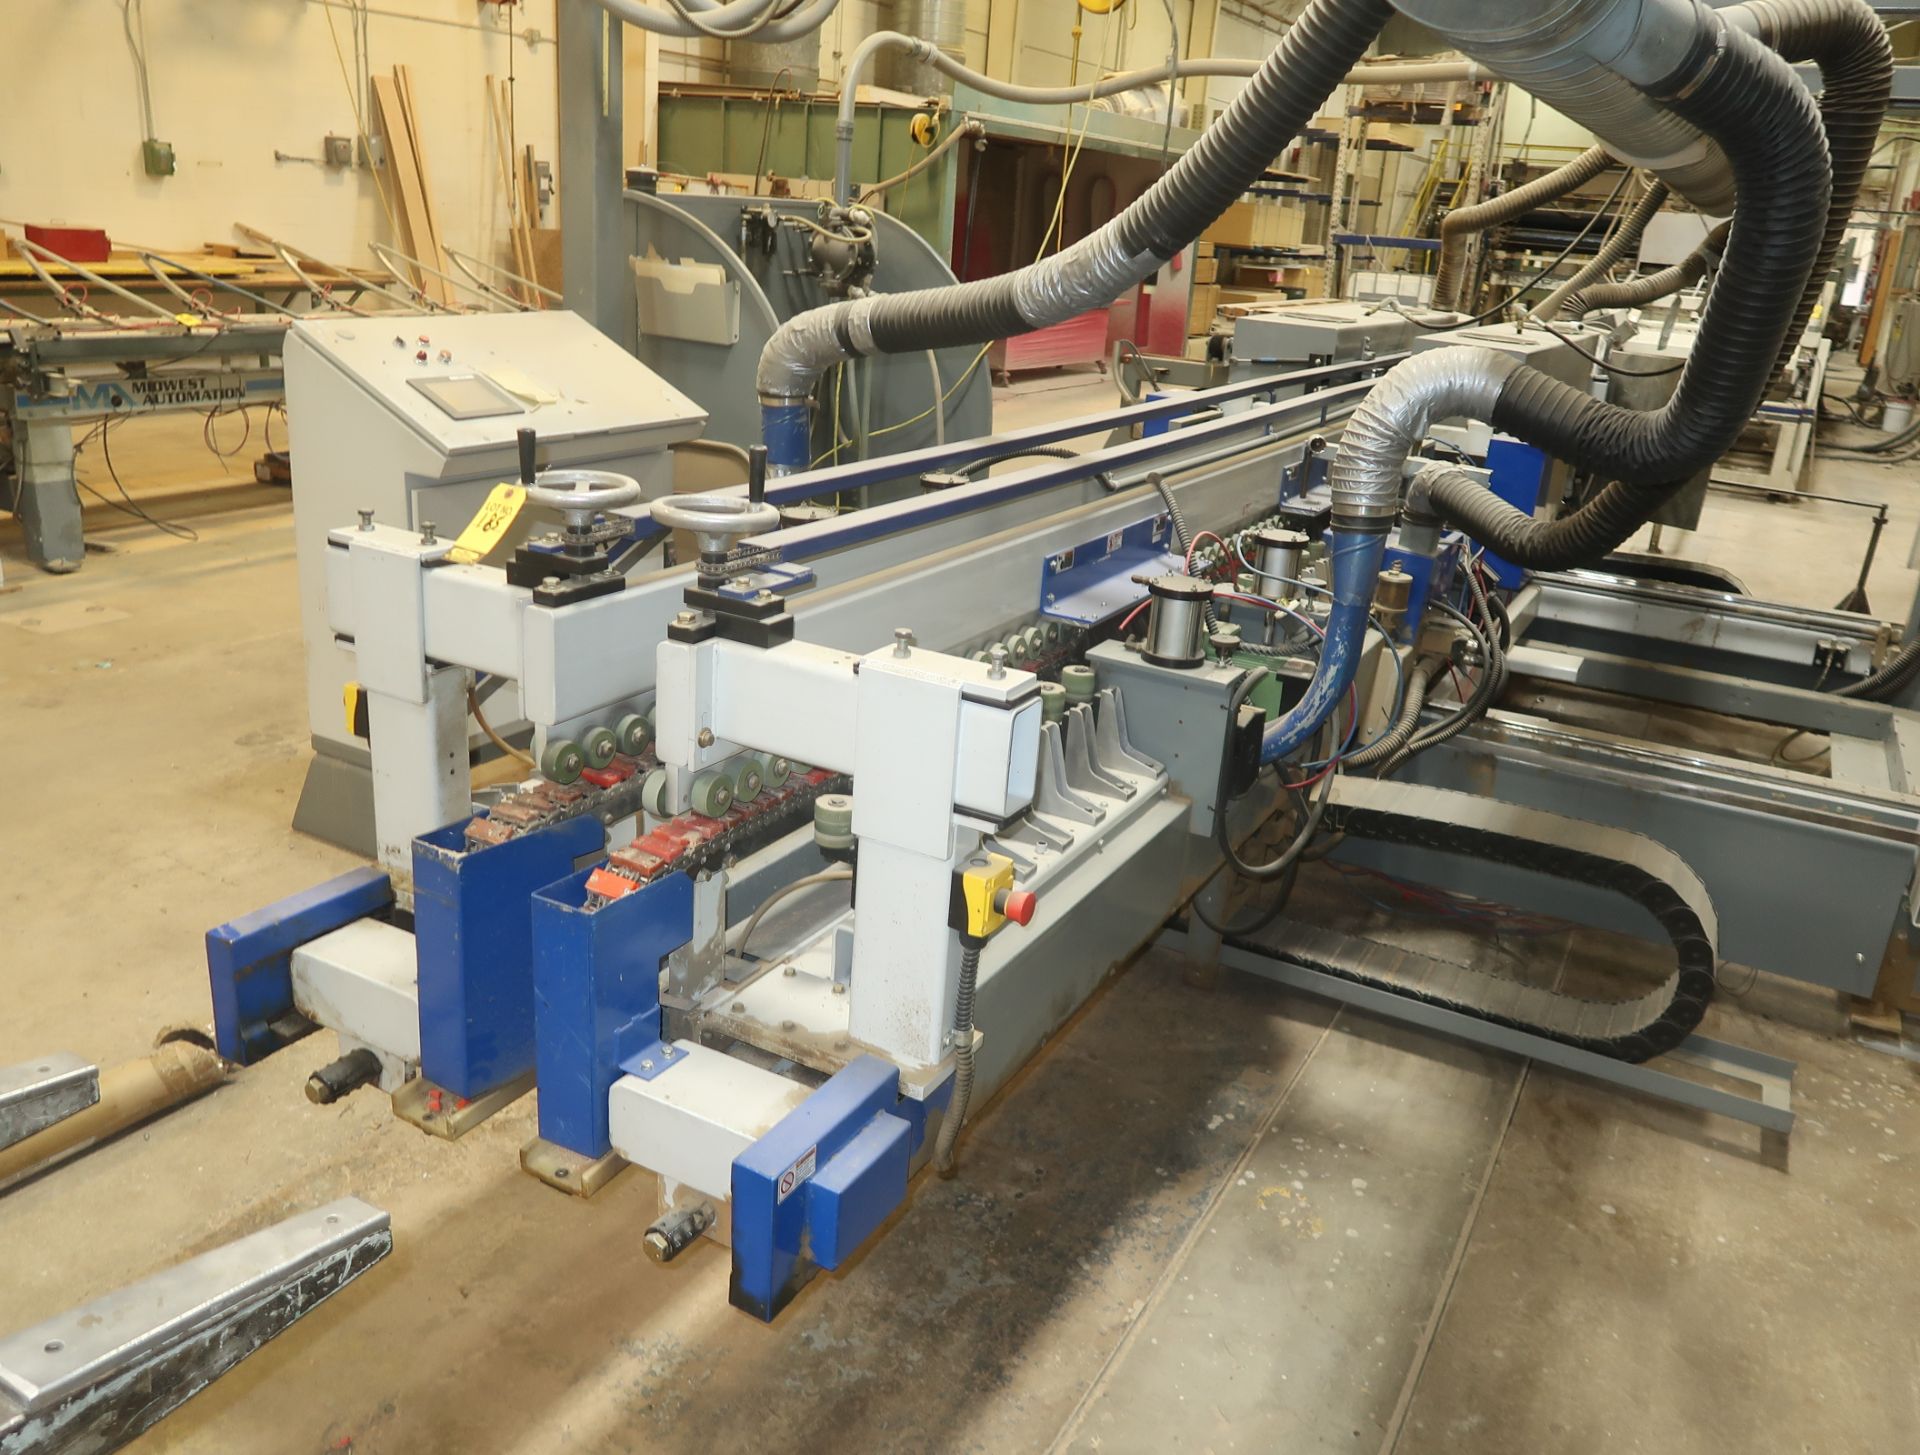 MIDWEST AUTOMATION "THE ROLLER" MDL. 2920 FORMER, MODIFIED TO FULLY AUTOMATED